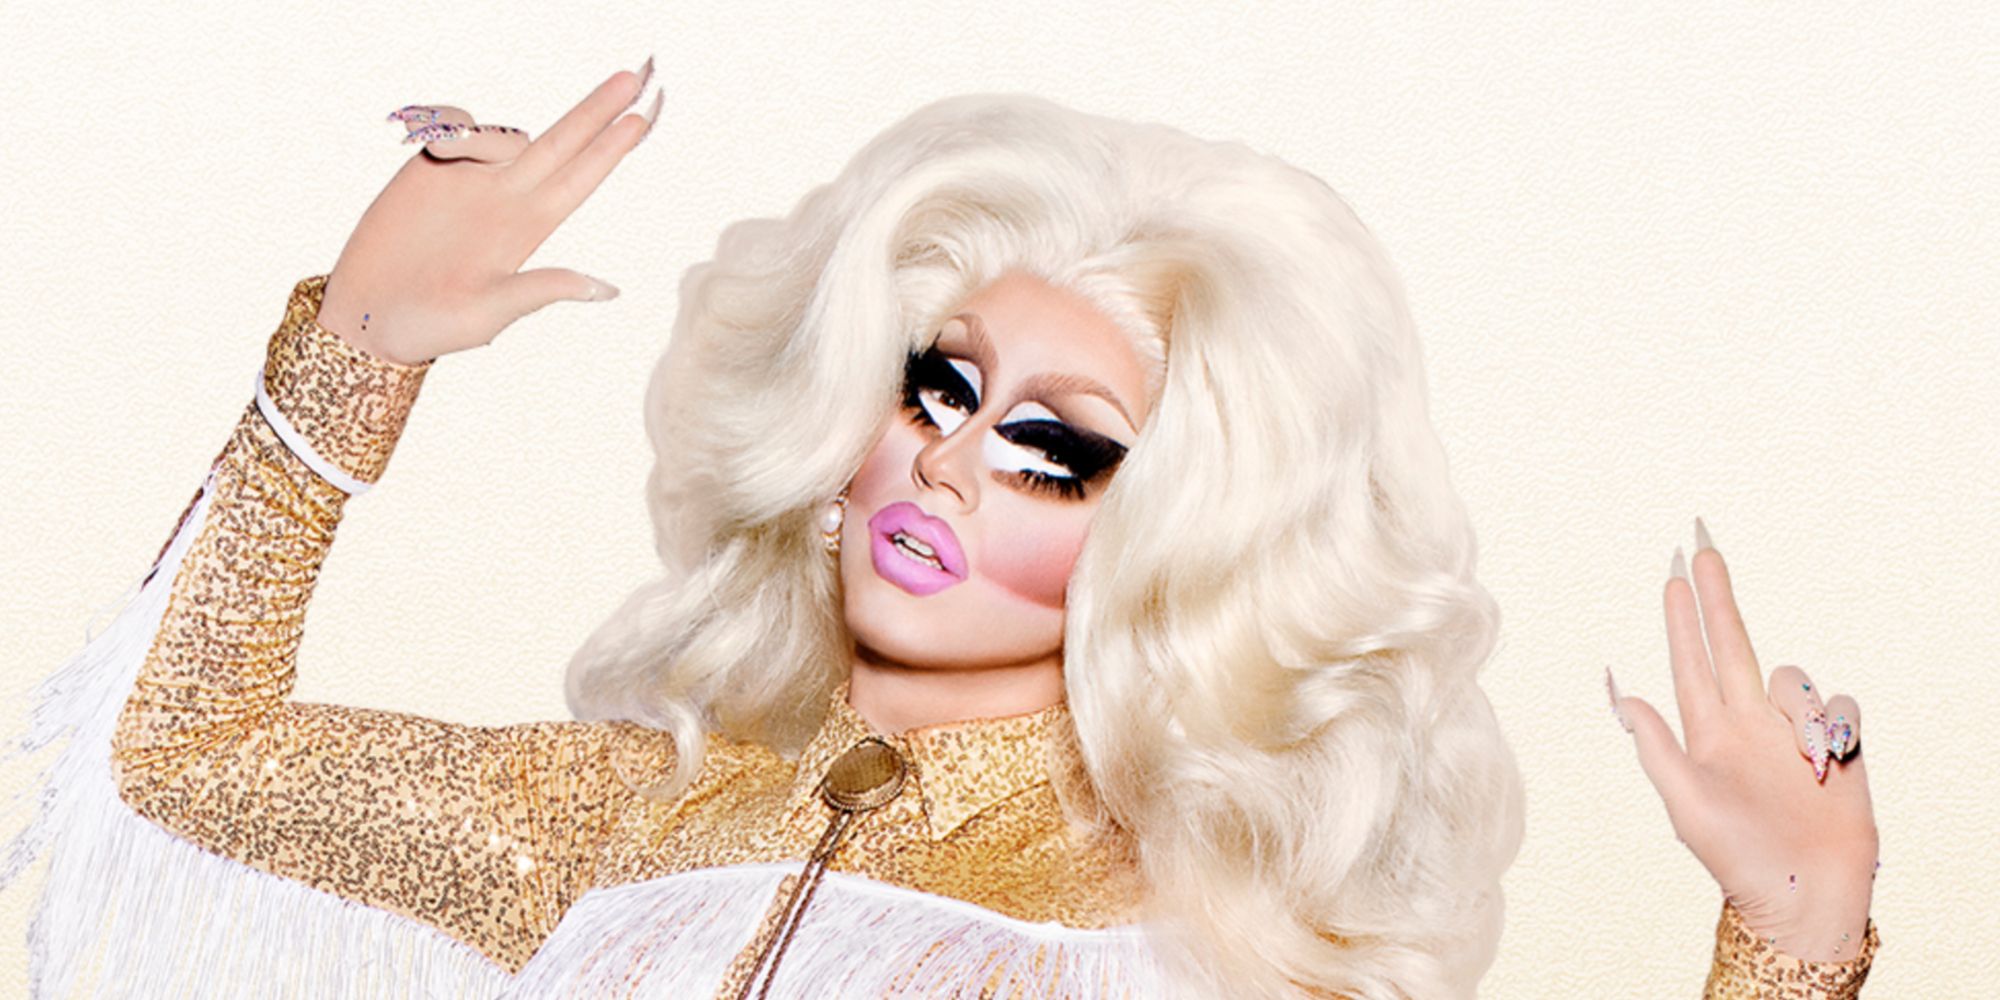 Trixie only fans